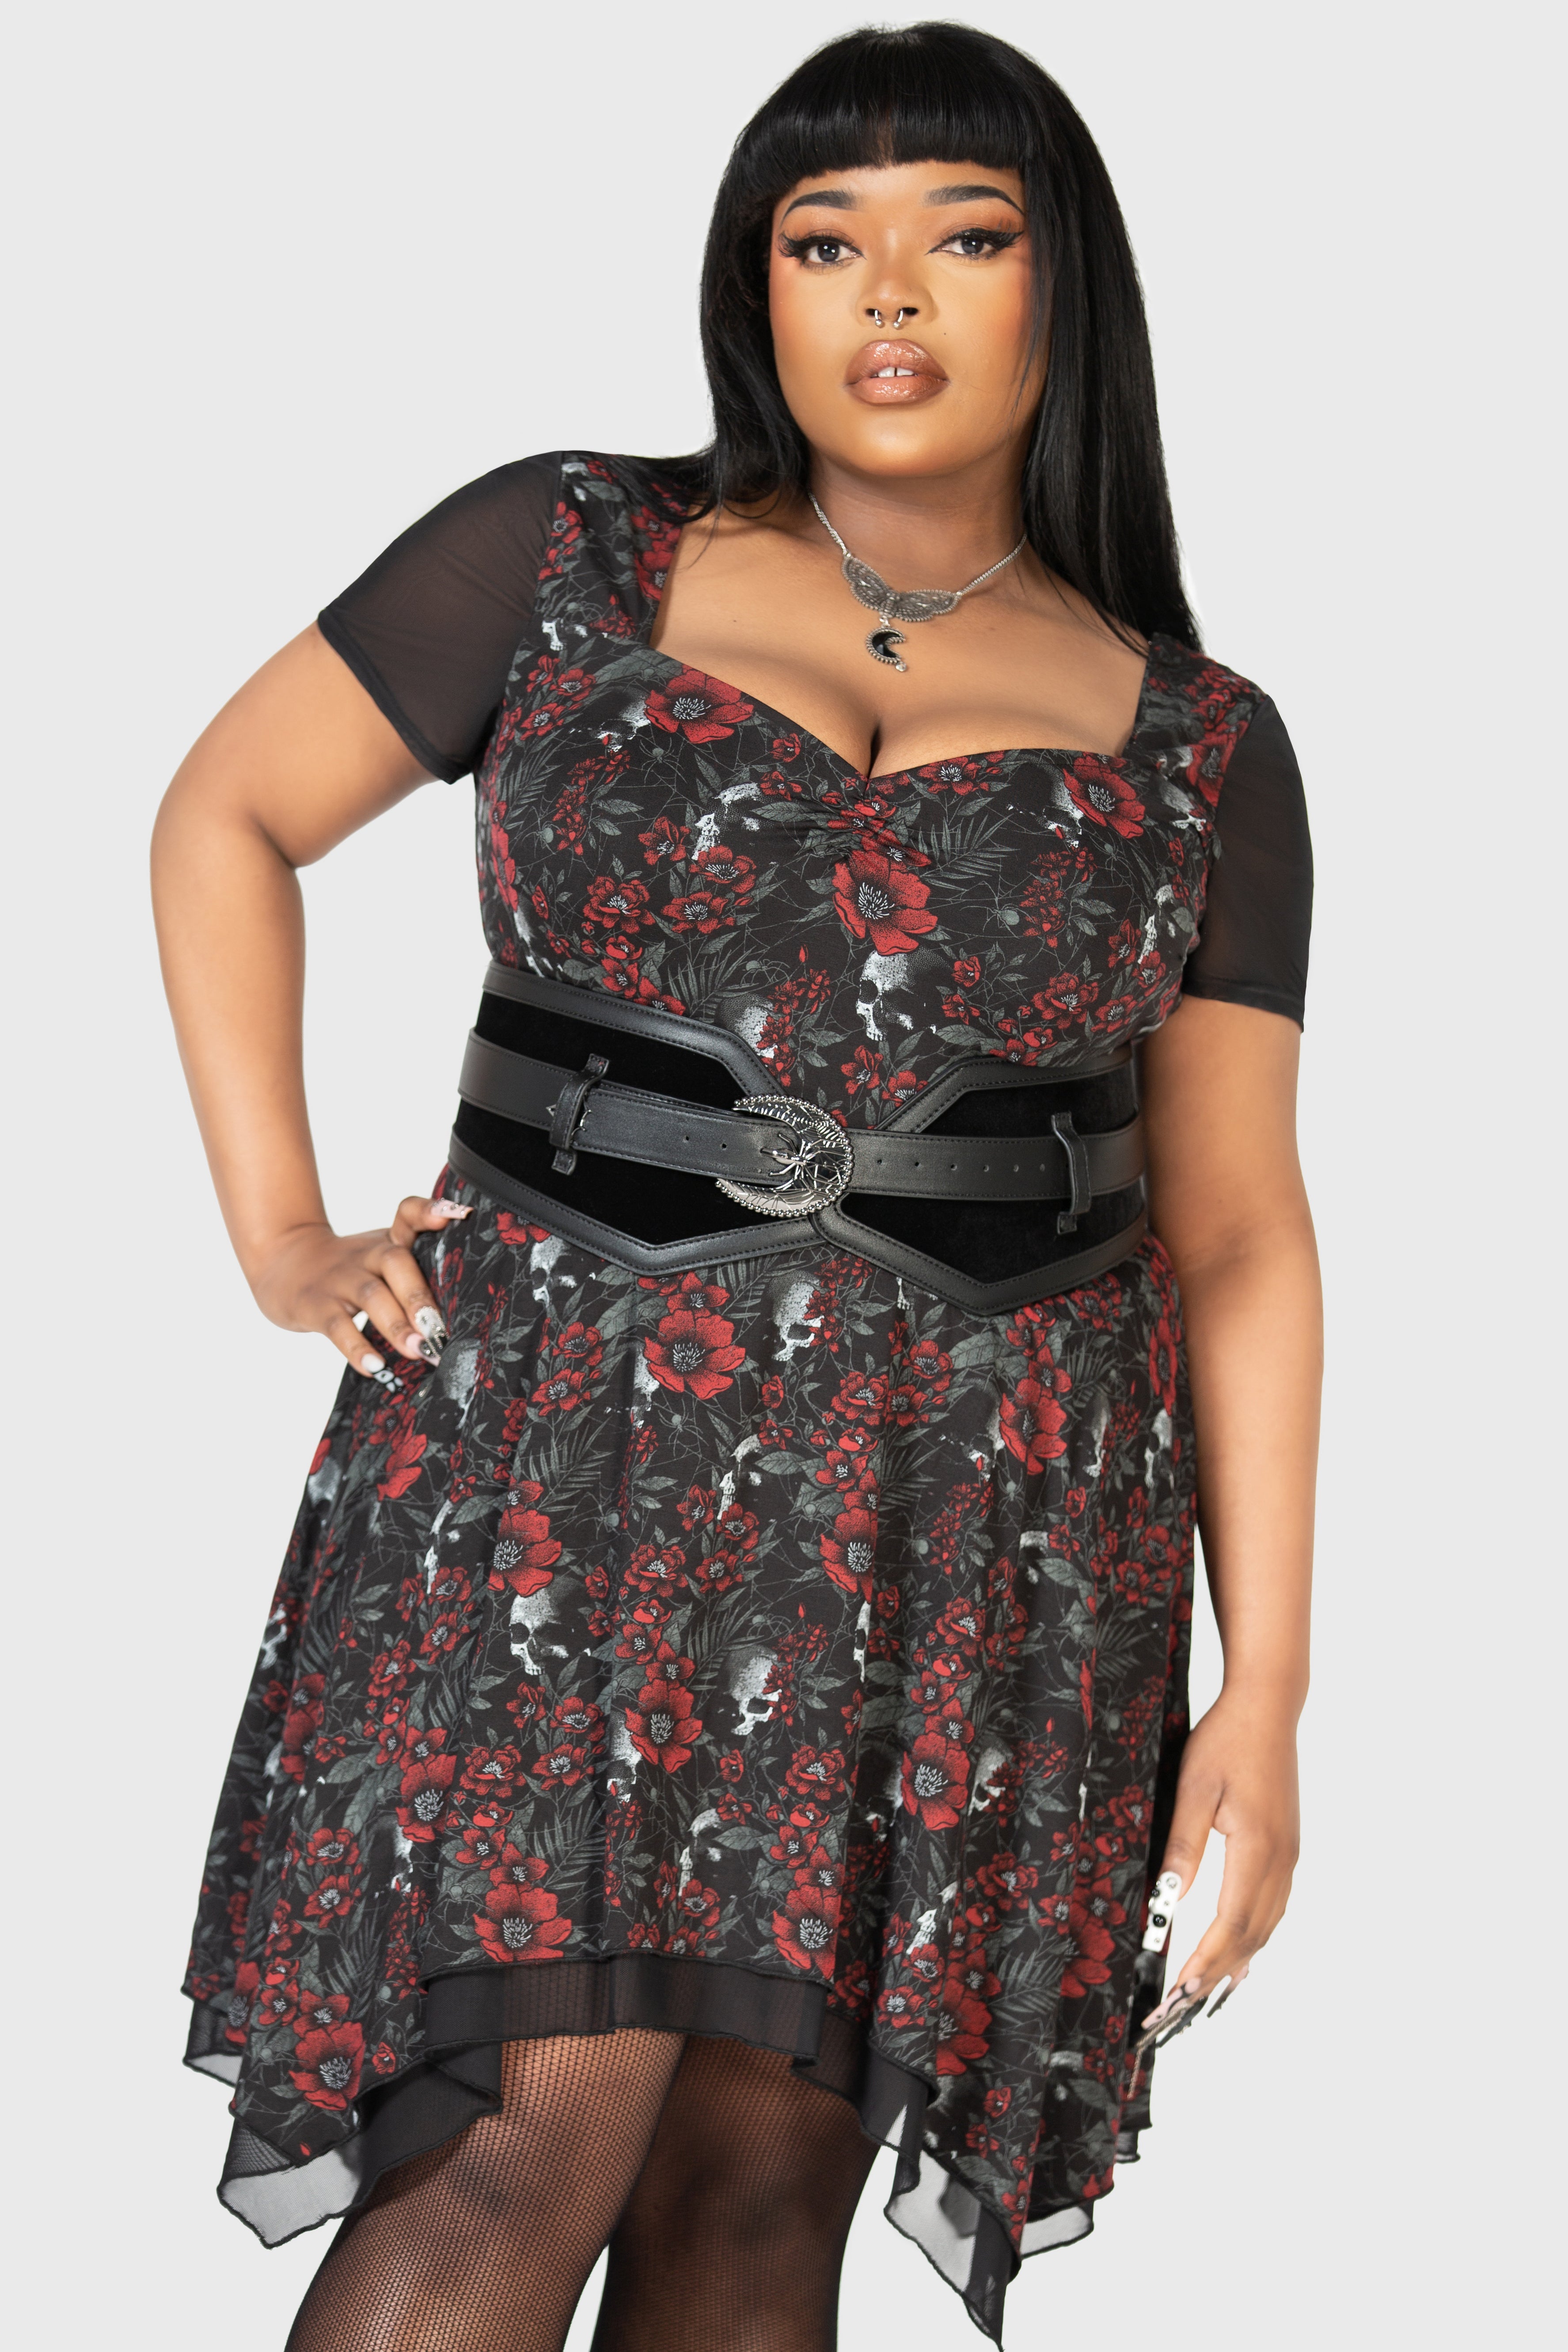 Buy Plus Size Waist Band online